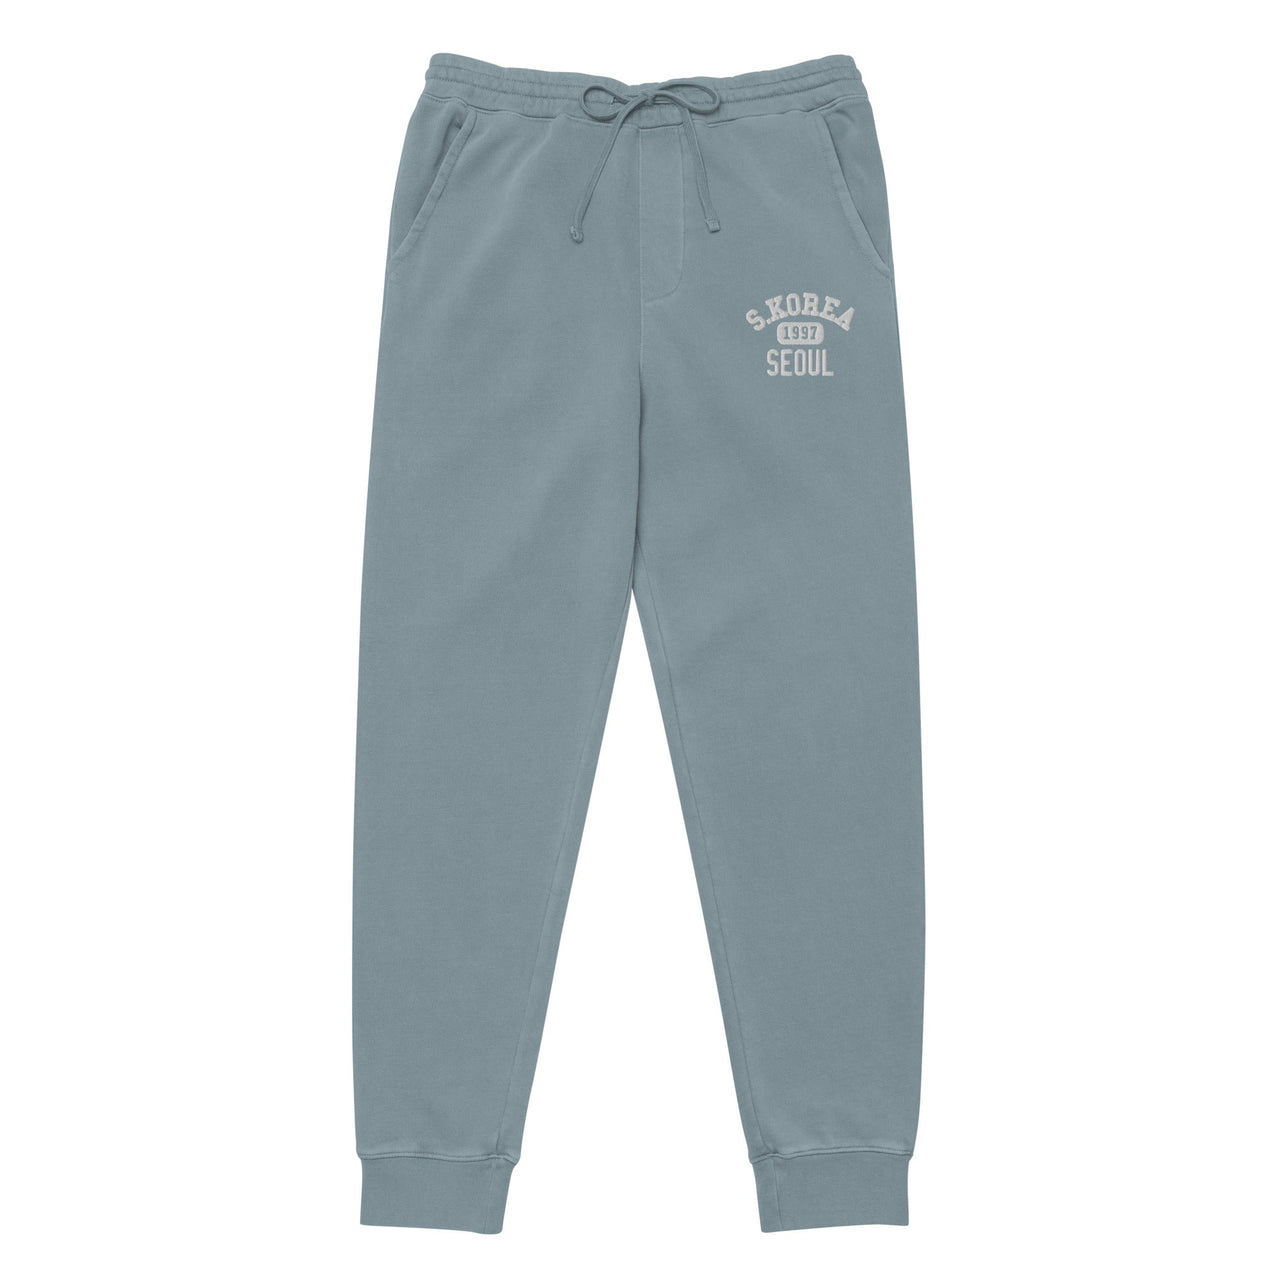 'Seoul' Embroidered Pigment-Dyed Sweatpants